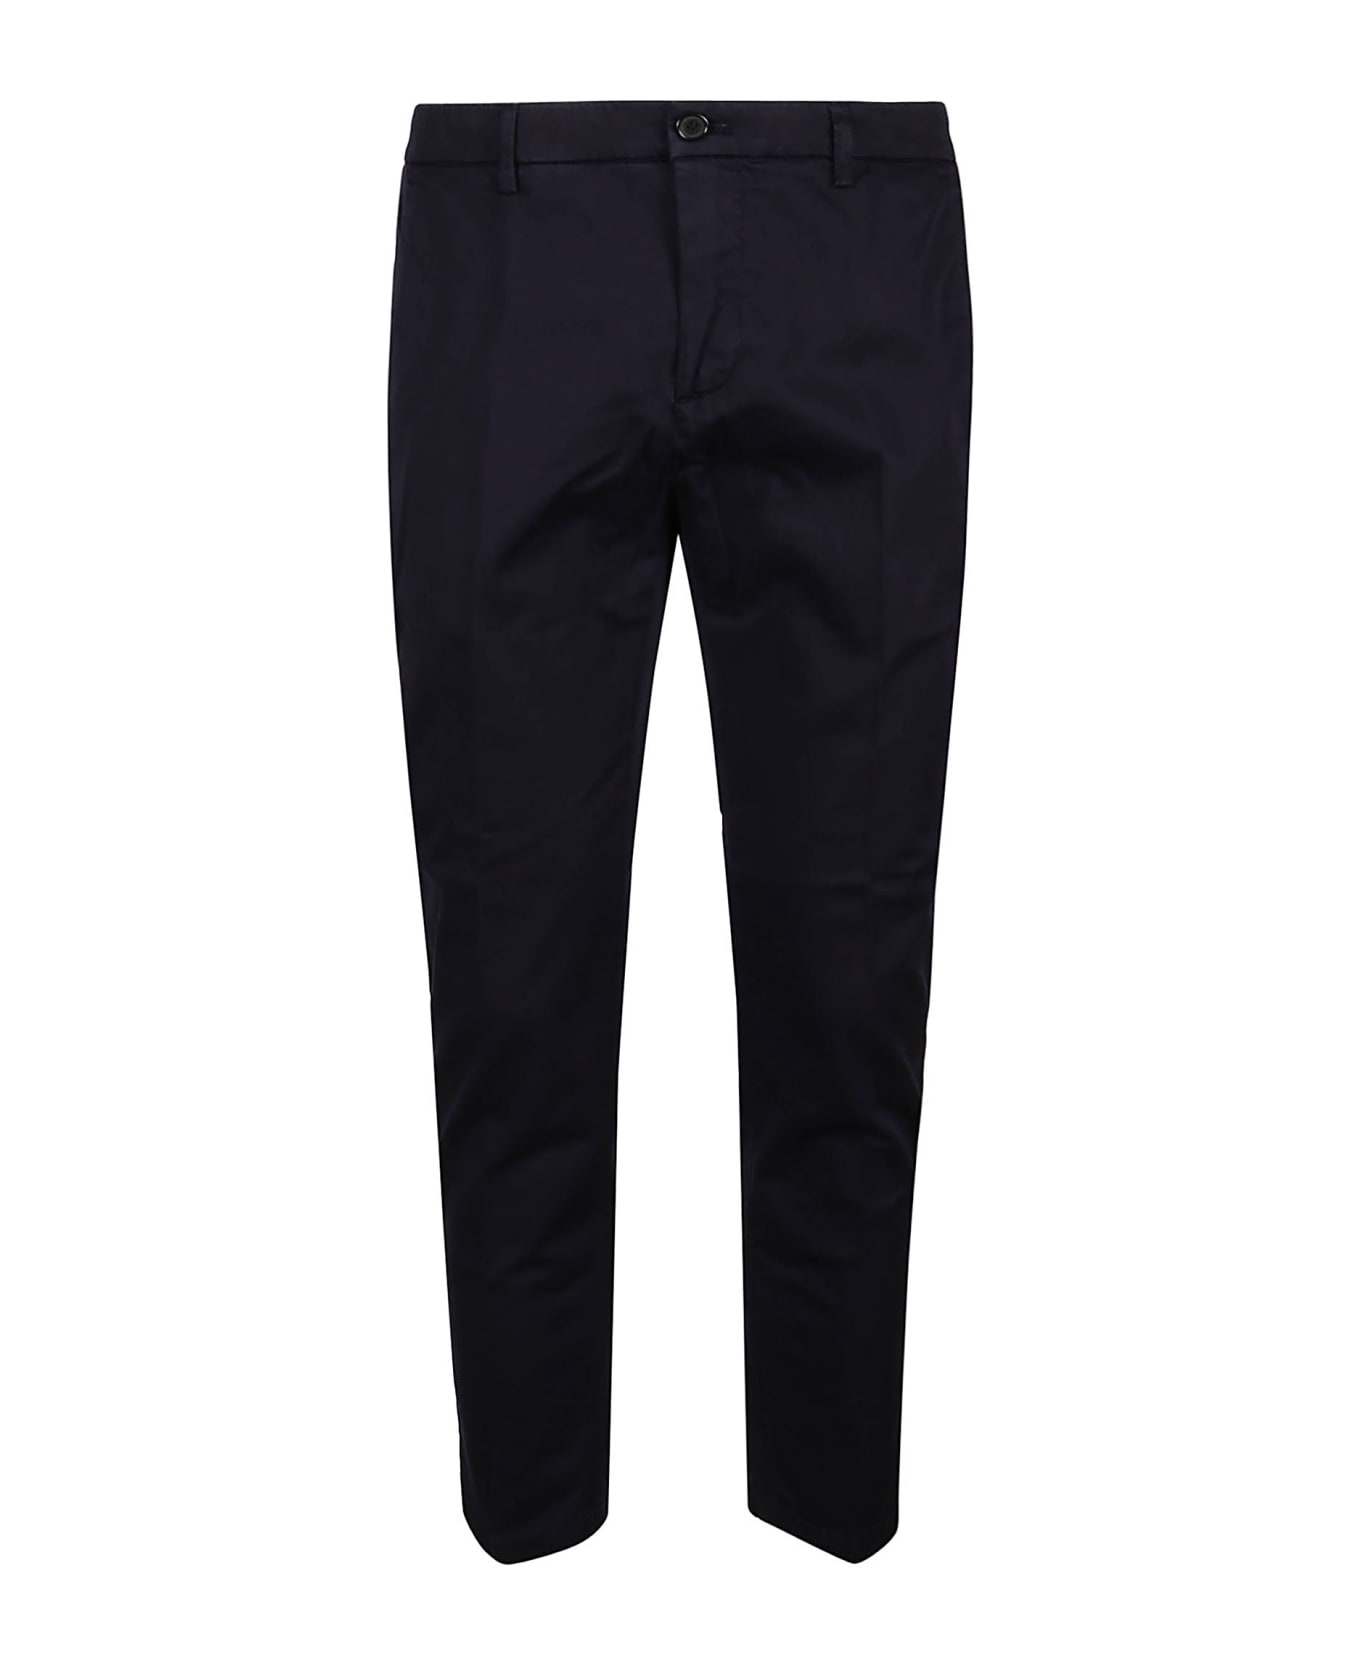 Department Five Cropped Prince Chinos Pant - Navy